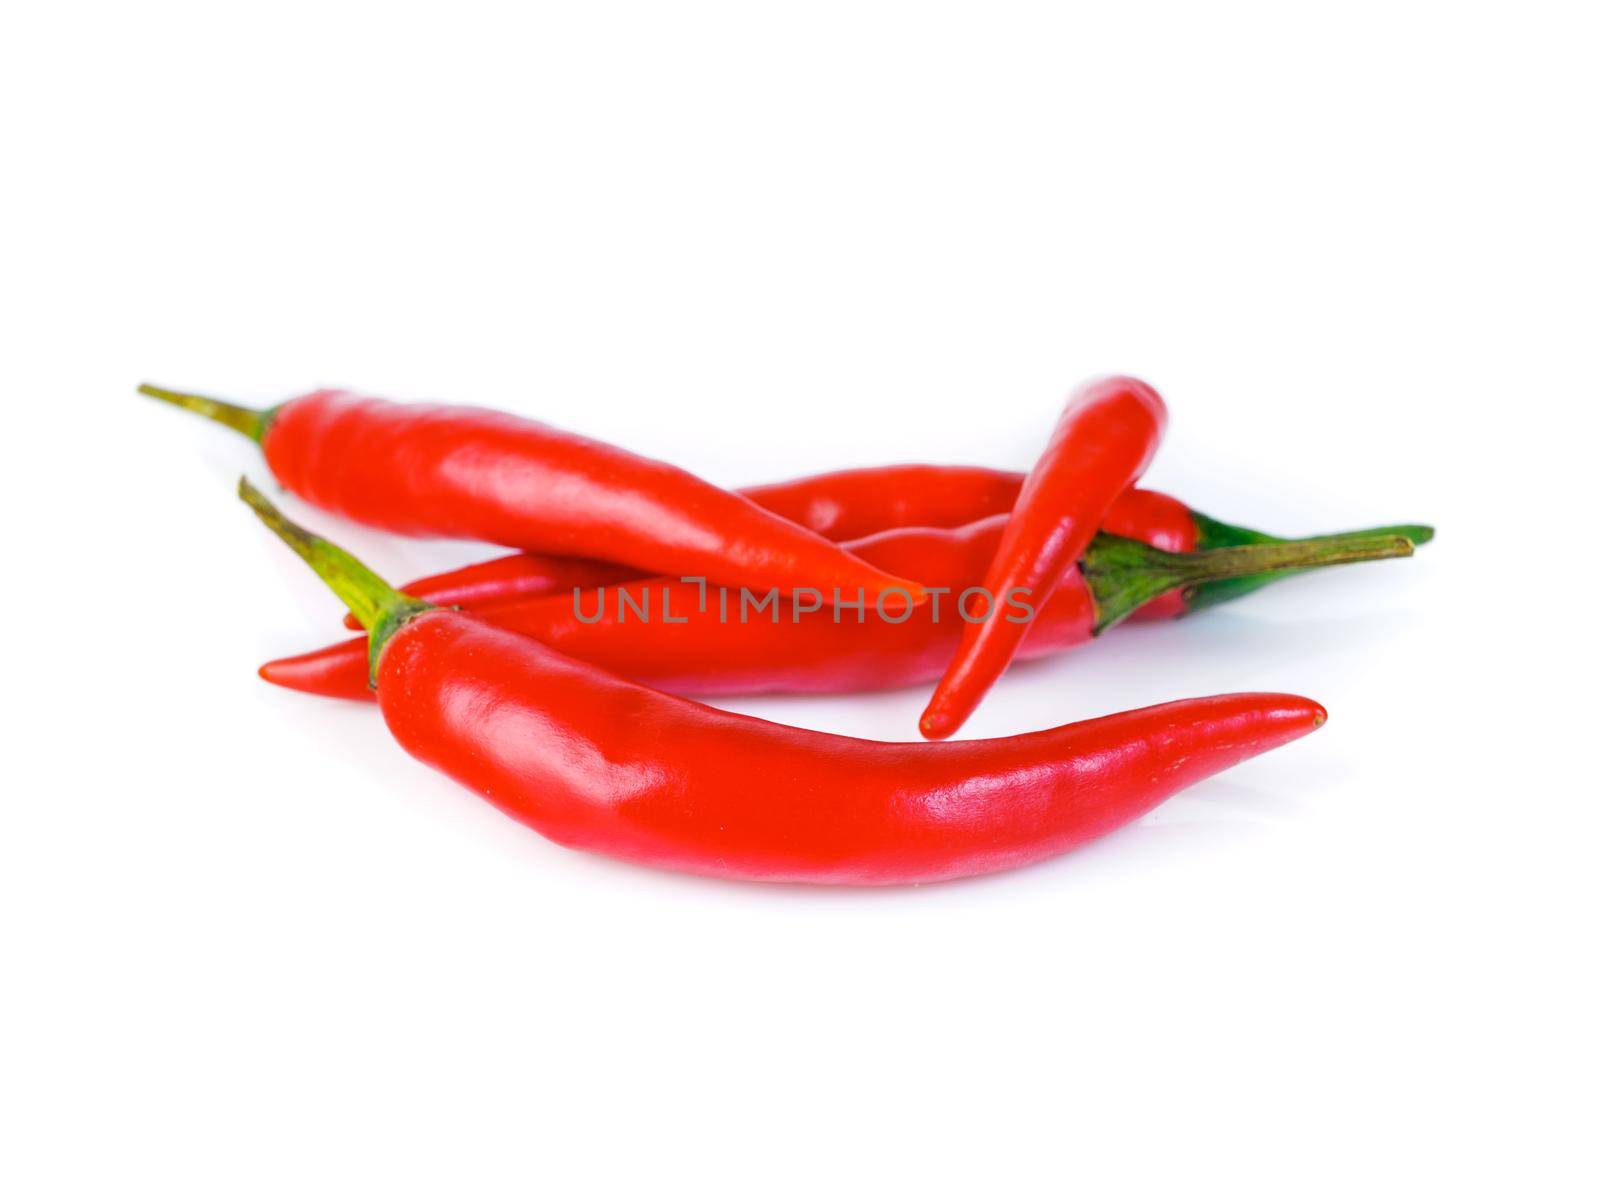 Red hot chili pepper on white background, side view